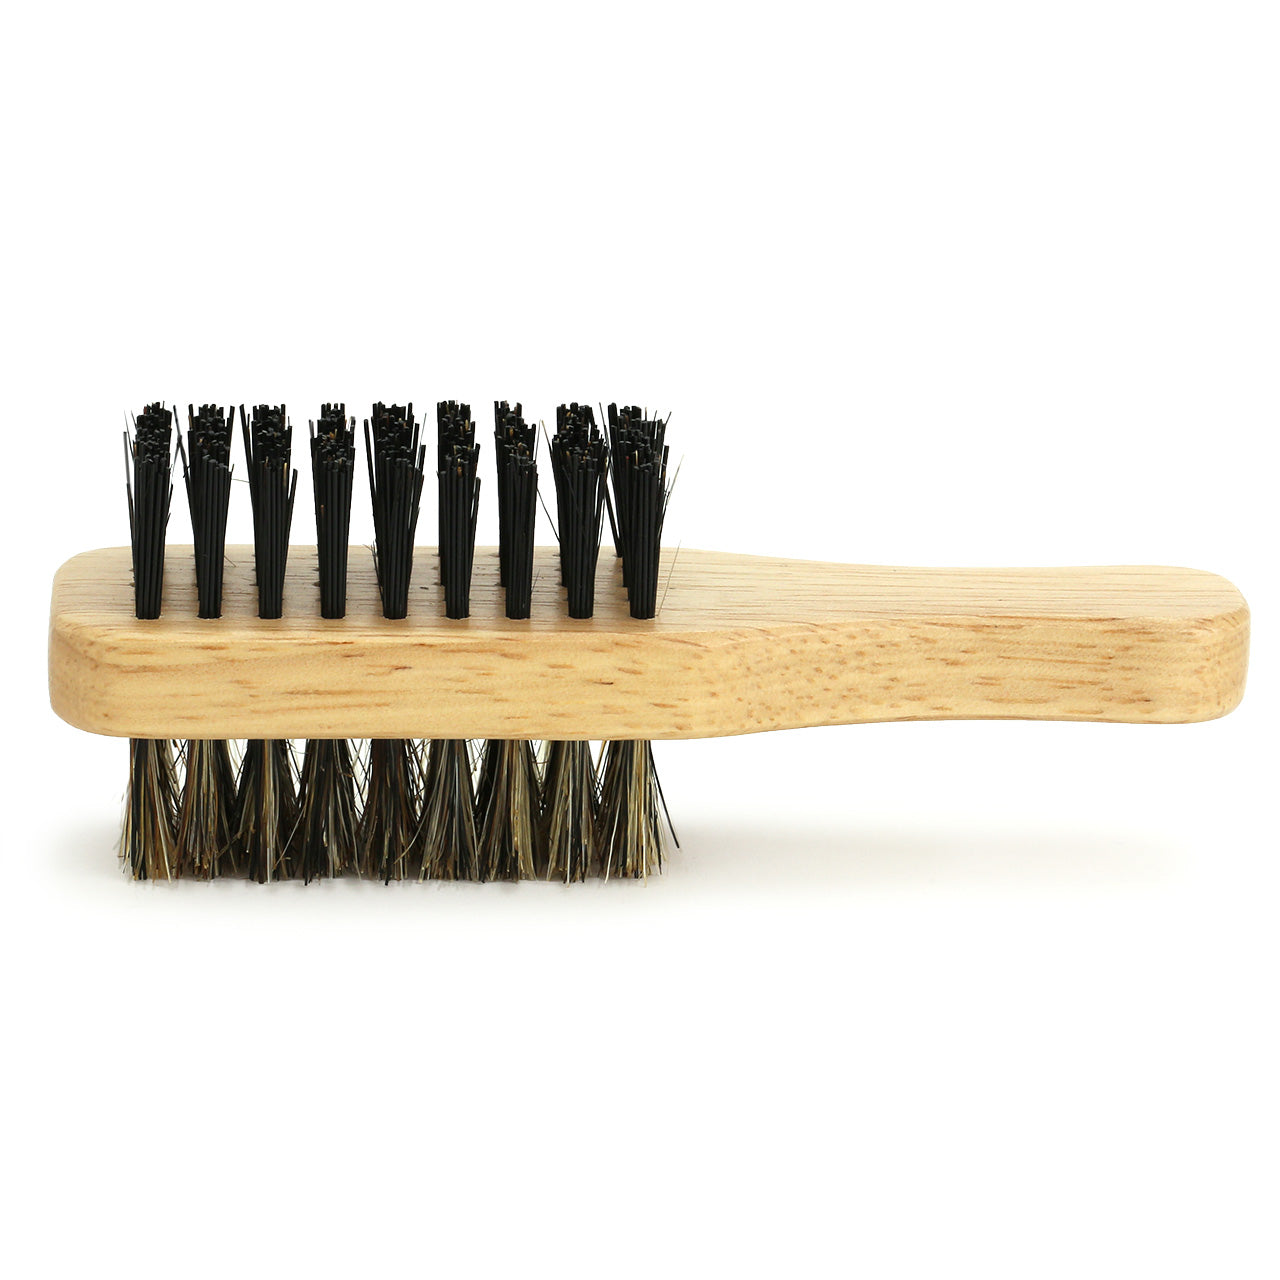 Beard Brush Small, two sided with wooden paddle handle - side view